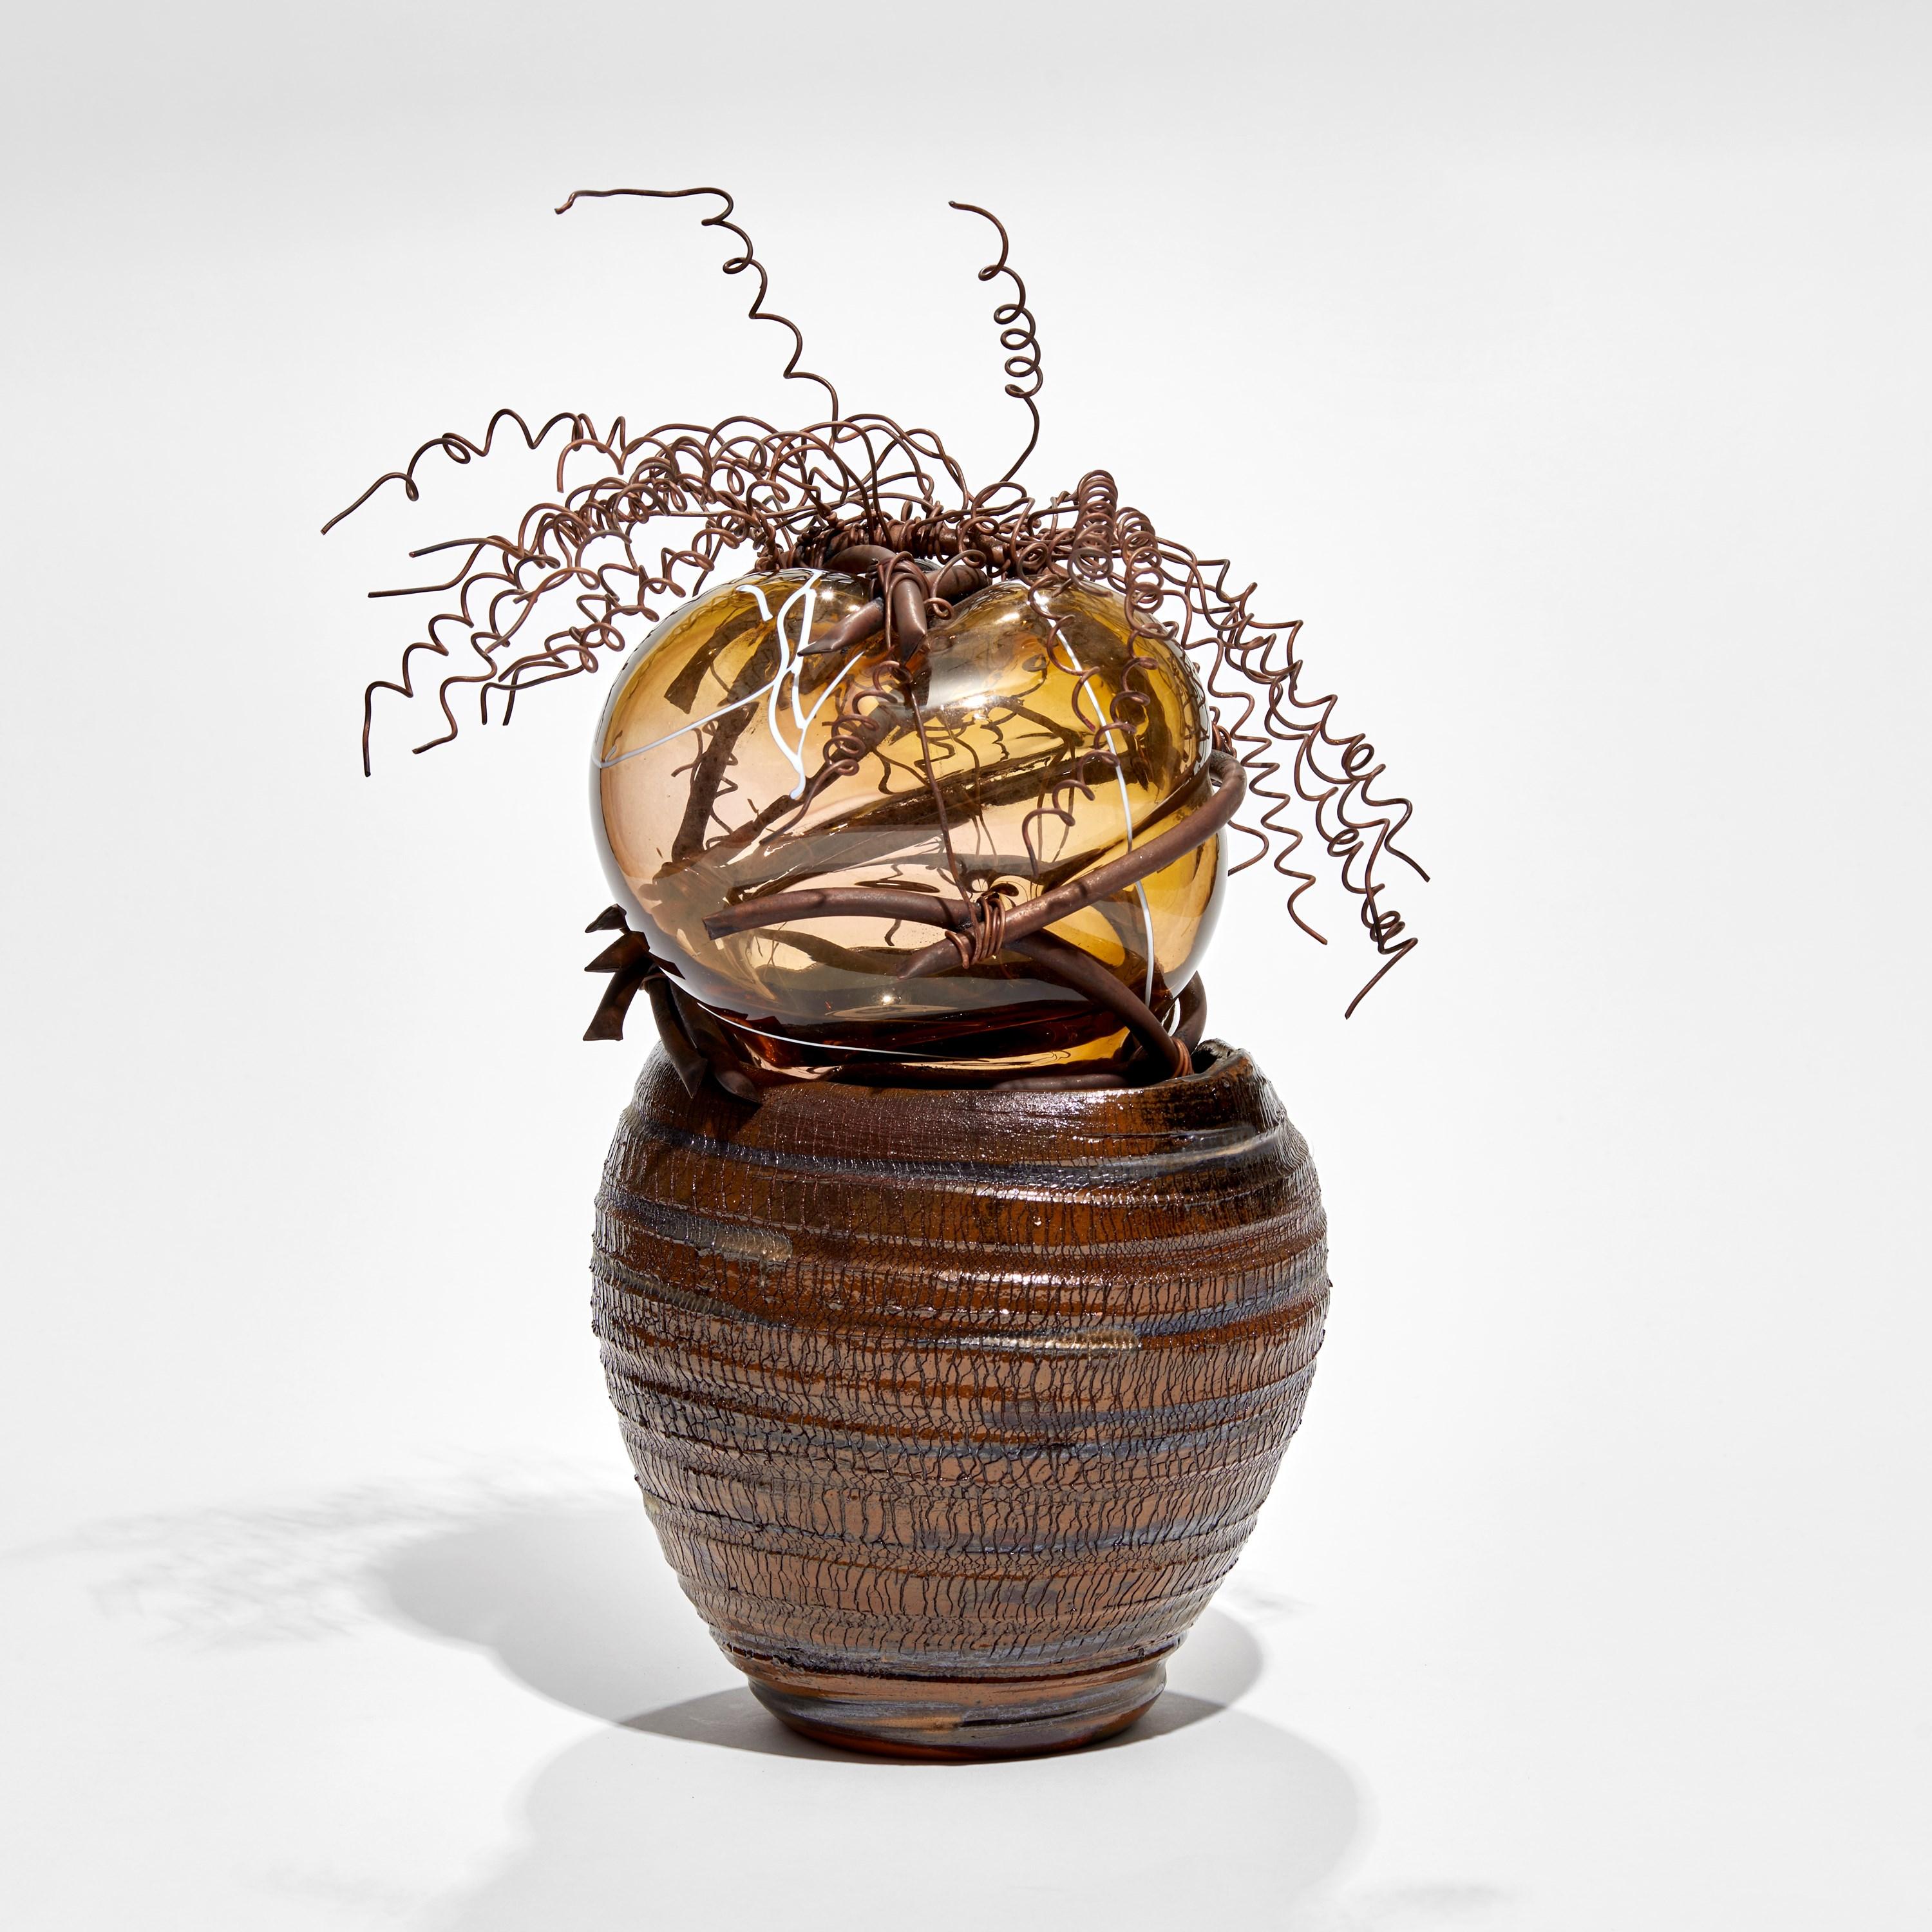 'Strange Fruit - The Congregation VI' is a unique sculpture by the British artist, Chris Day, created from handblown & sculpted glass with terracotta, micro bore copper pipe and copper wire.

This piece was created as a part of the artist's